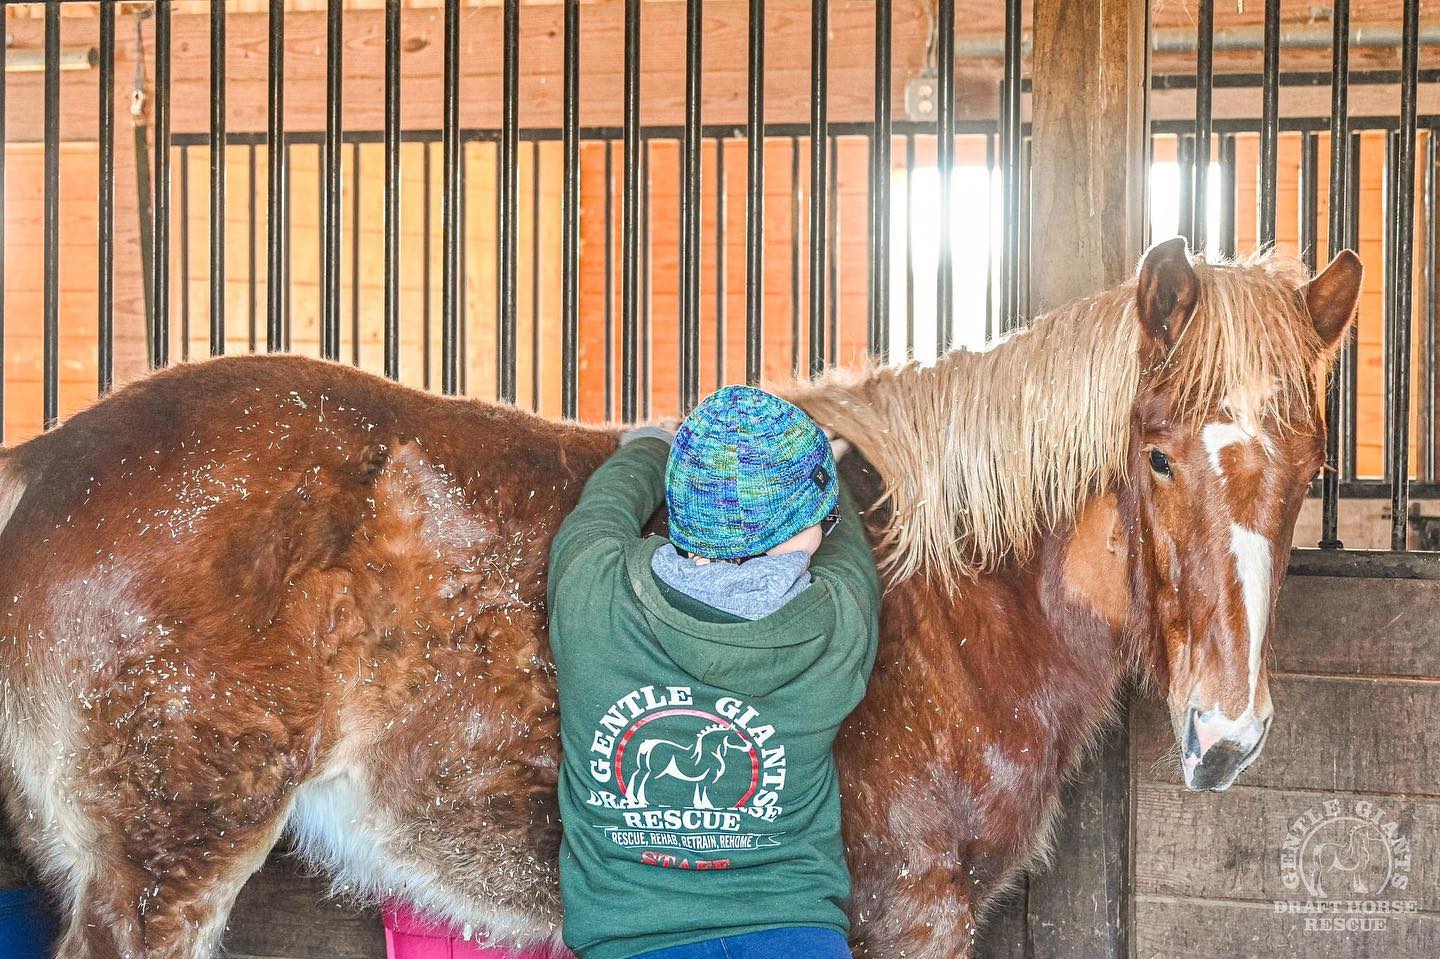 A person wearing a Gentle Giants Draft Horse Rescue hoodie scratching and giving care to a beautiful, brown horse in a stable.